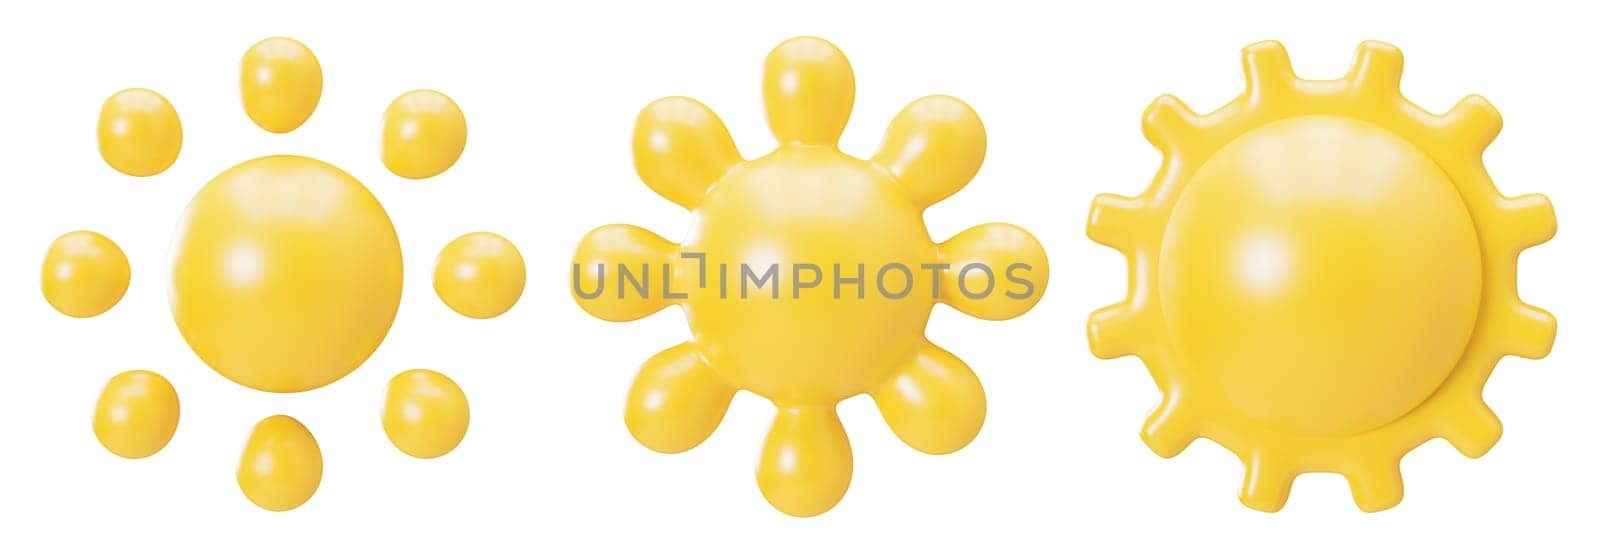 Yellow 3D suns group isolated on white background. Cut out design elements. Cute cartoon style sun. 3D render